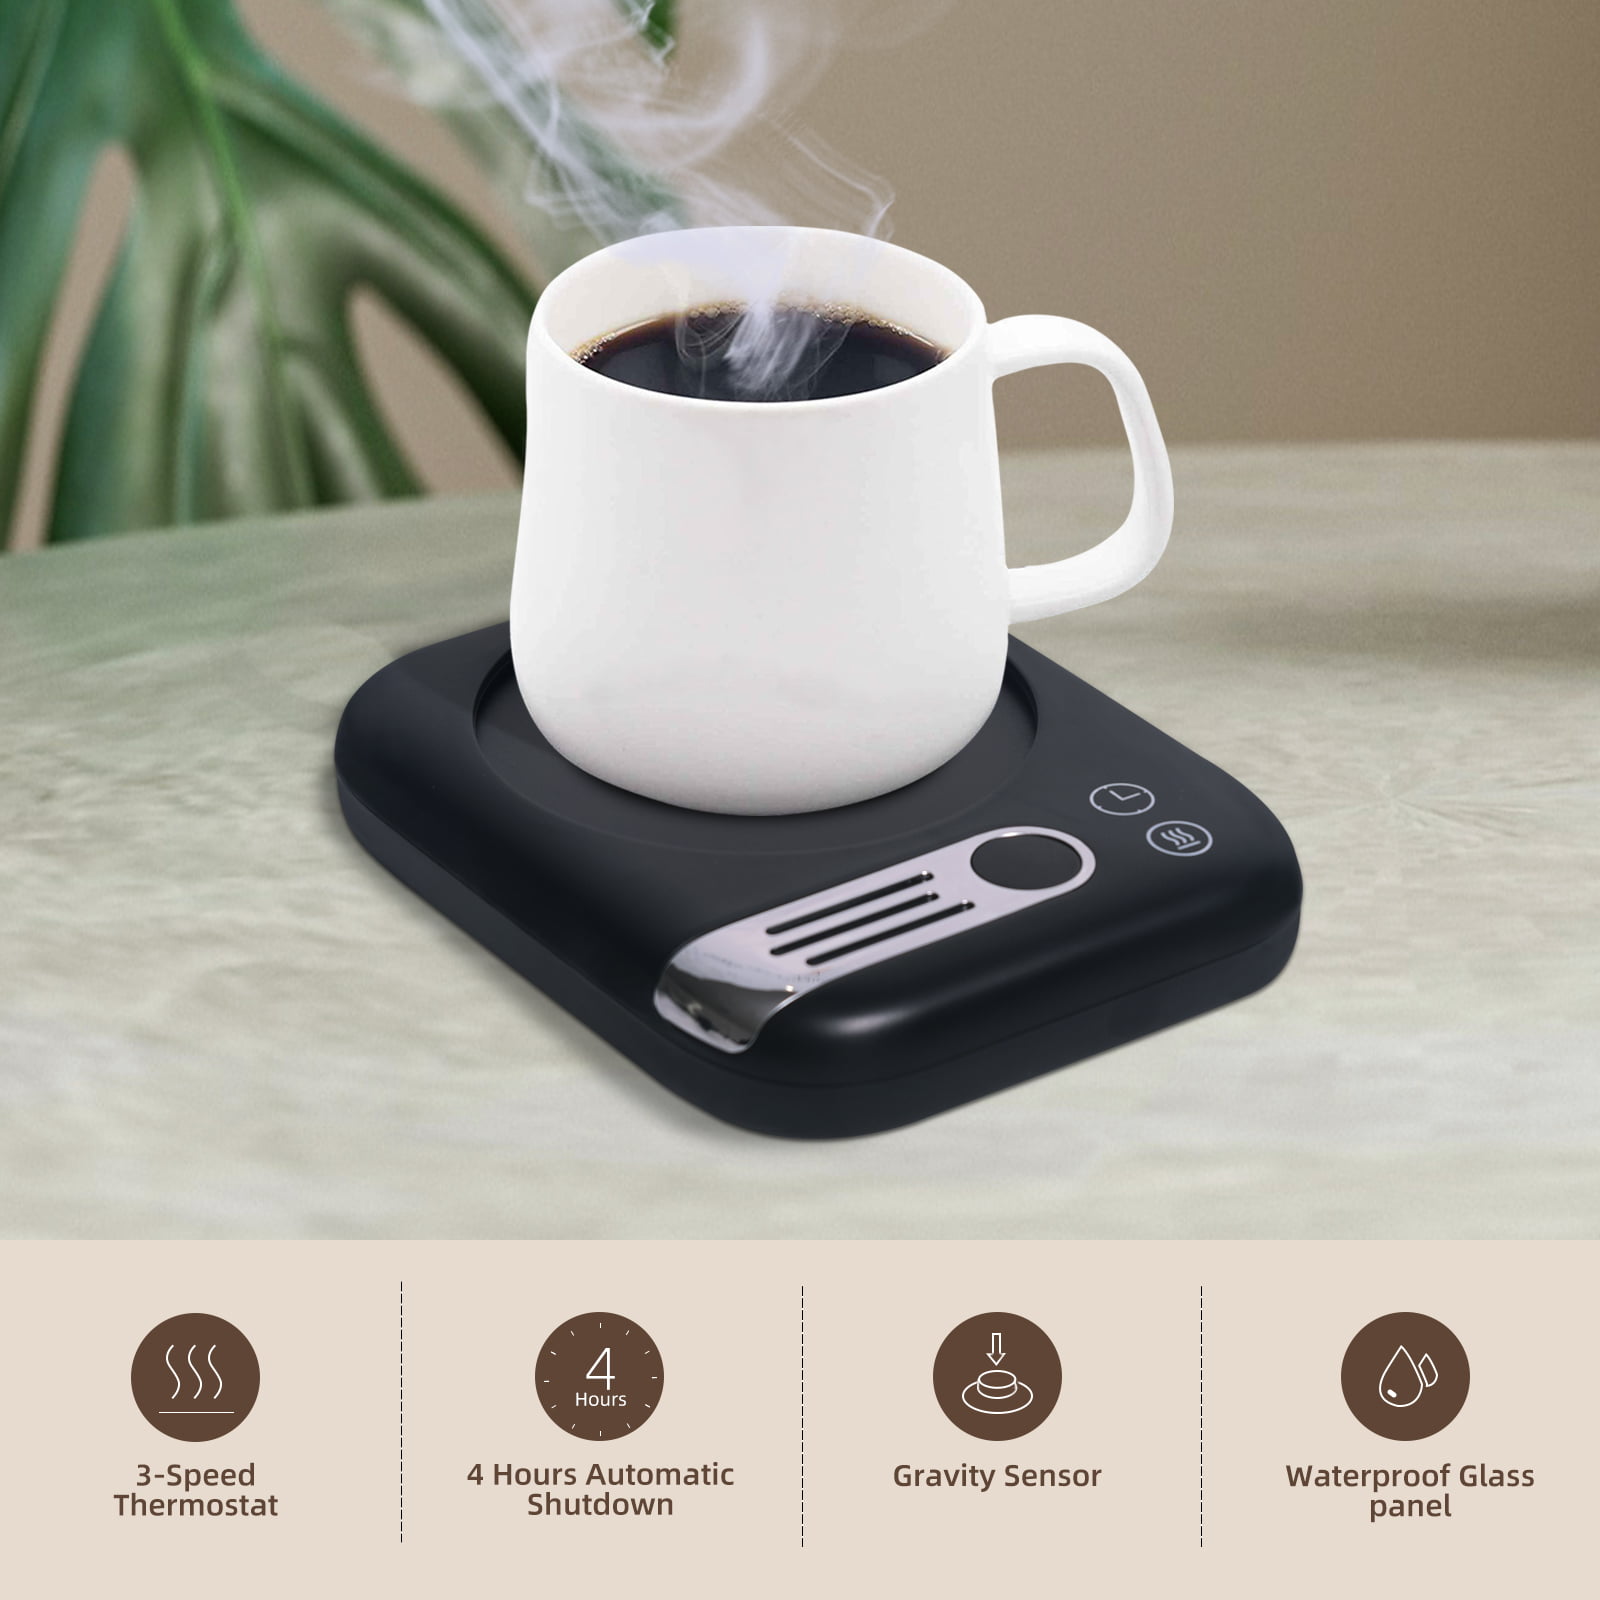 USB Cup Warmer with Gravity Sensor Switch Winter 55°C Constant